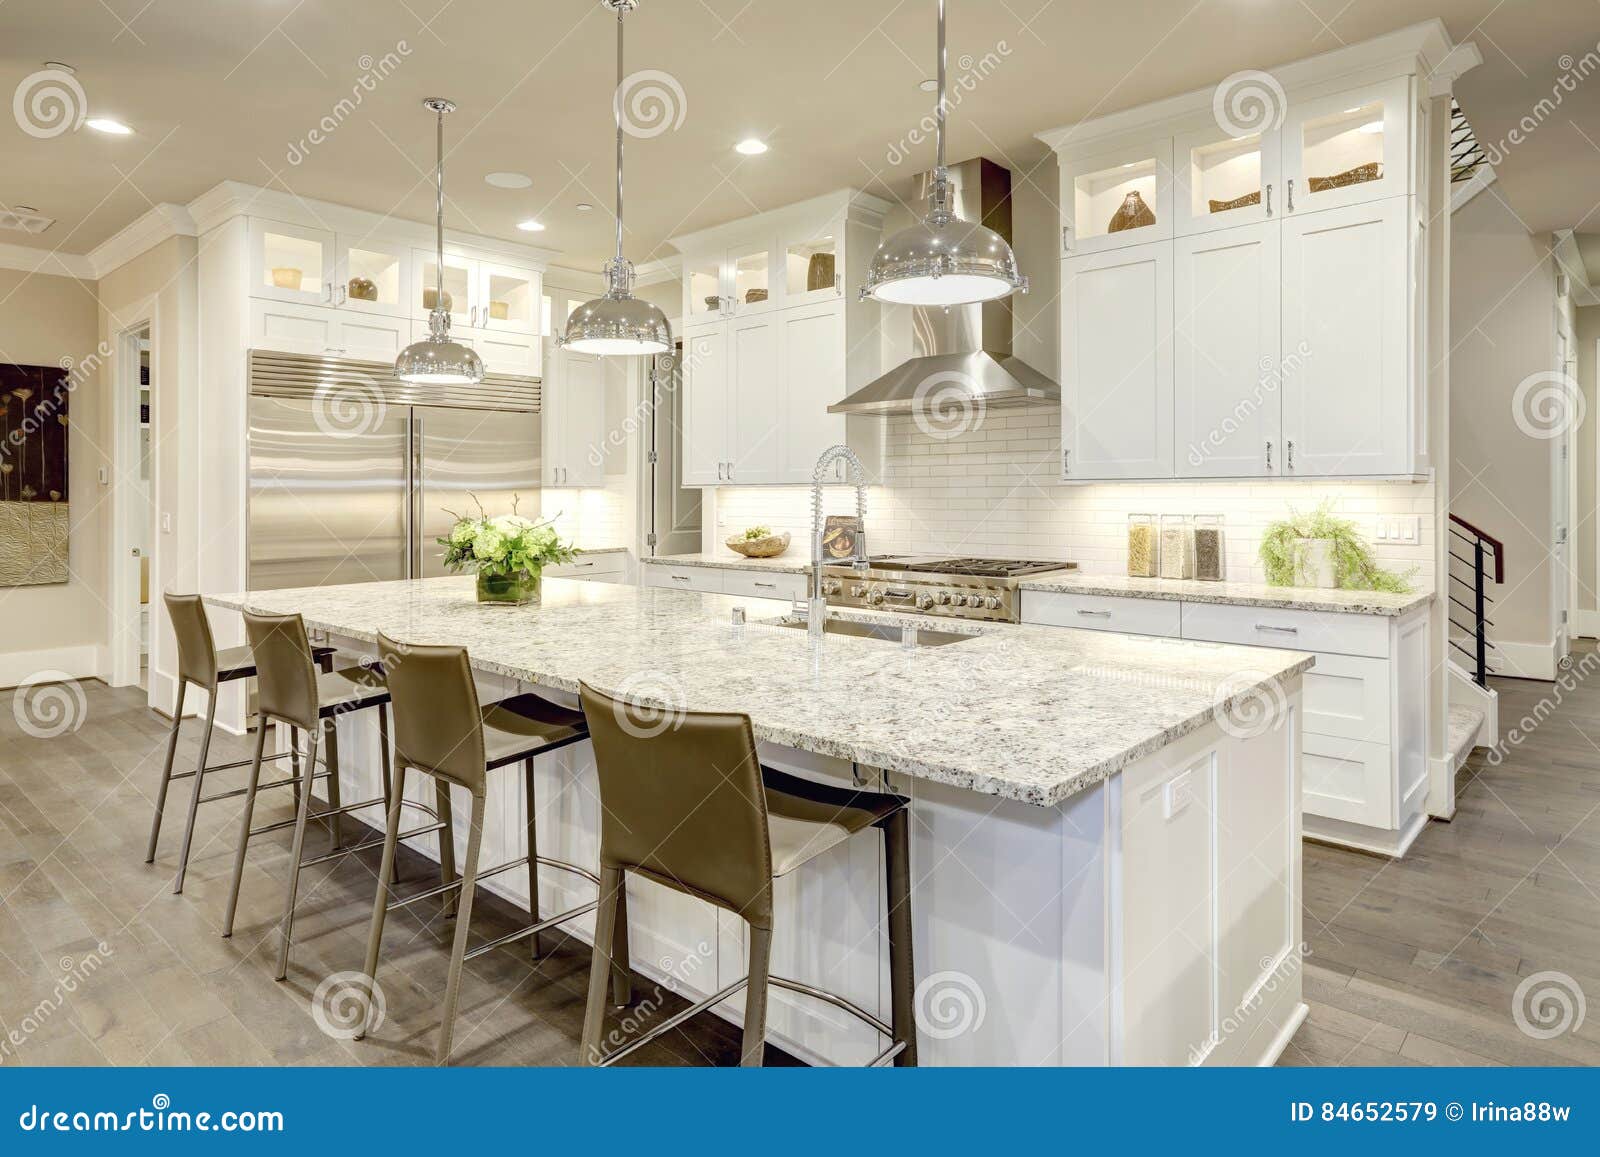 white kitchen  in new luxurious home